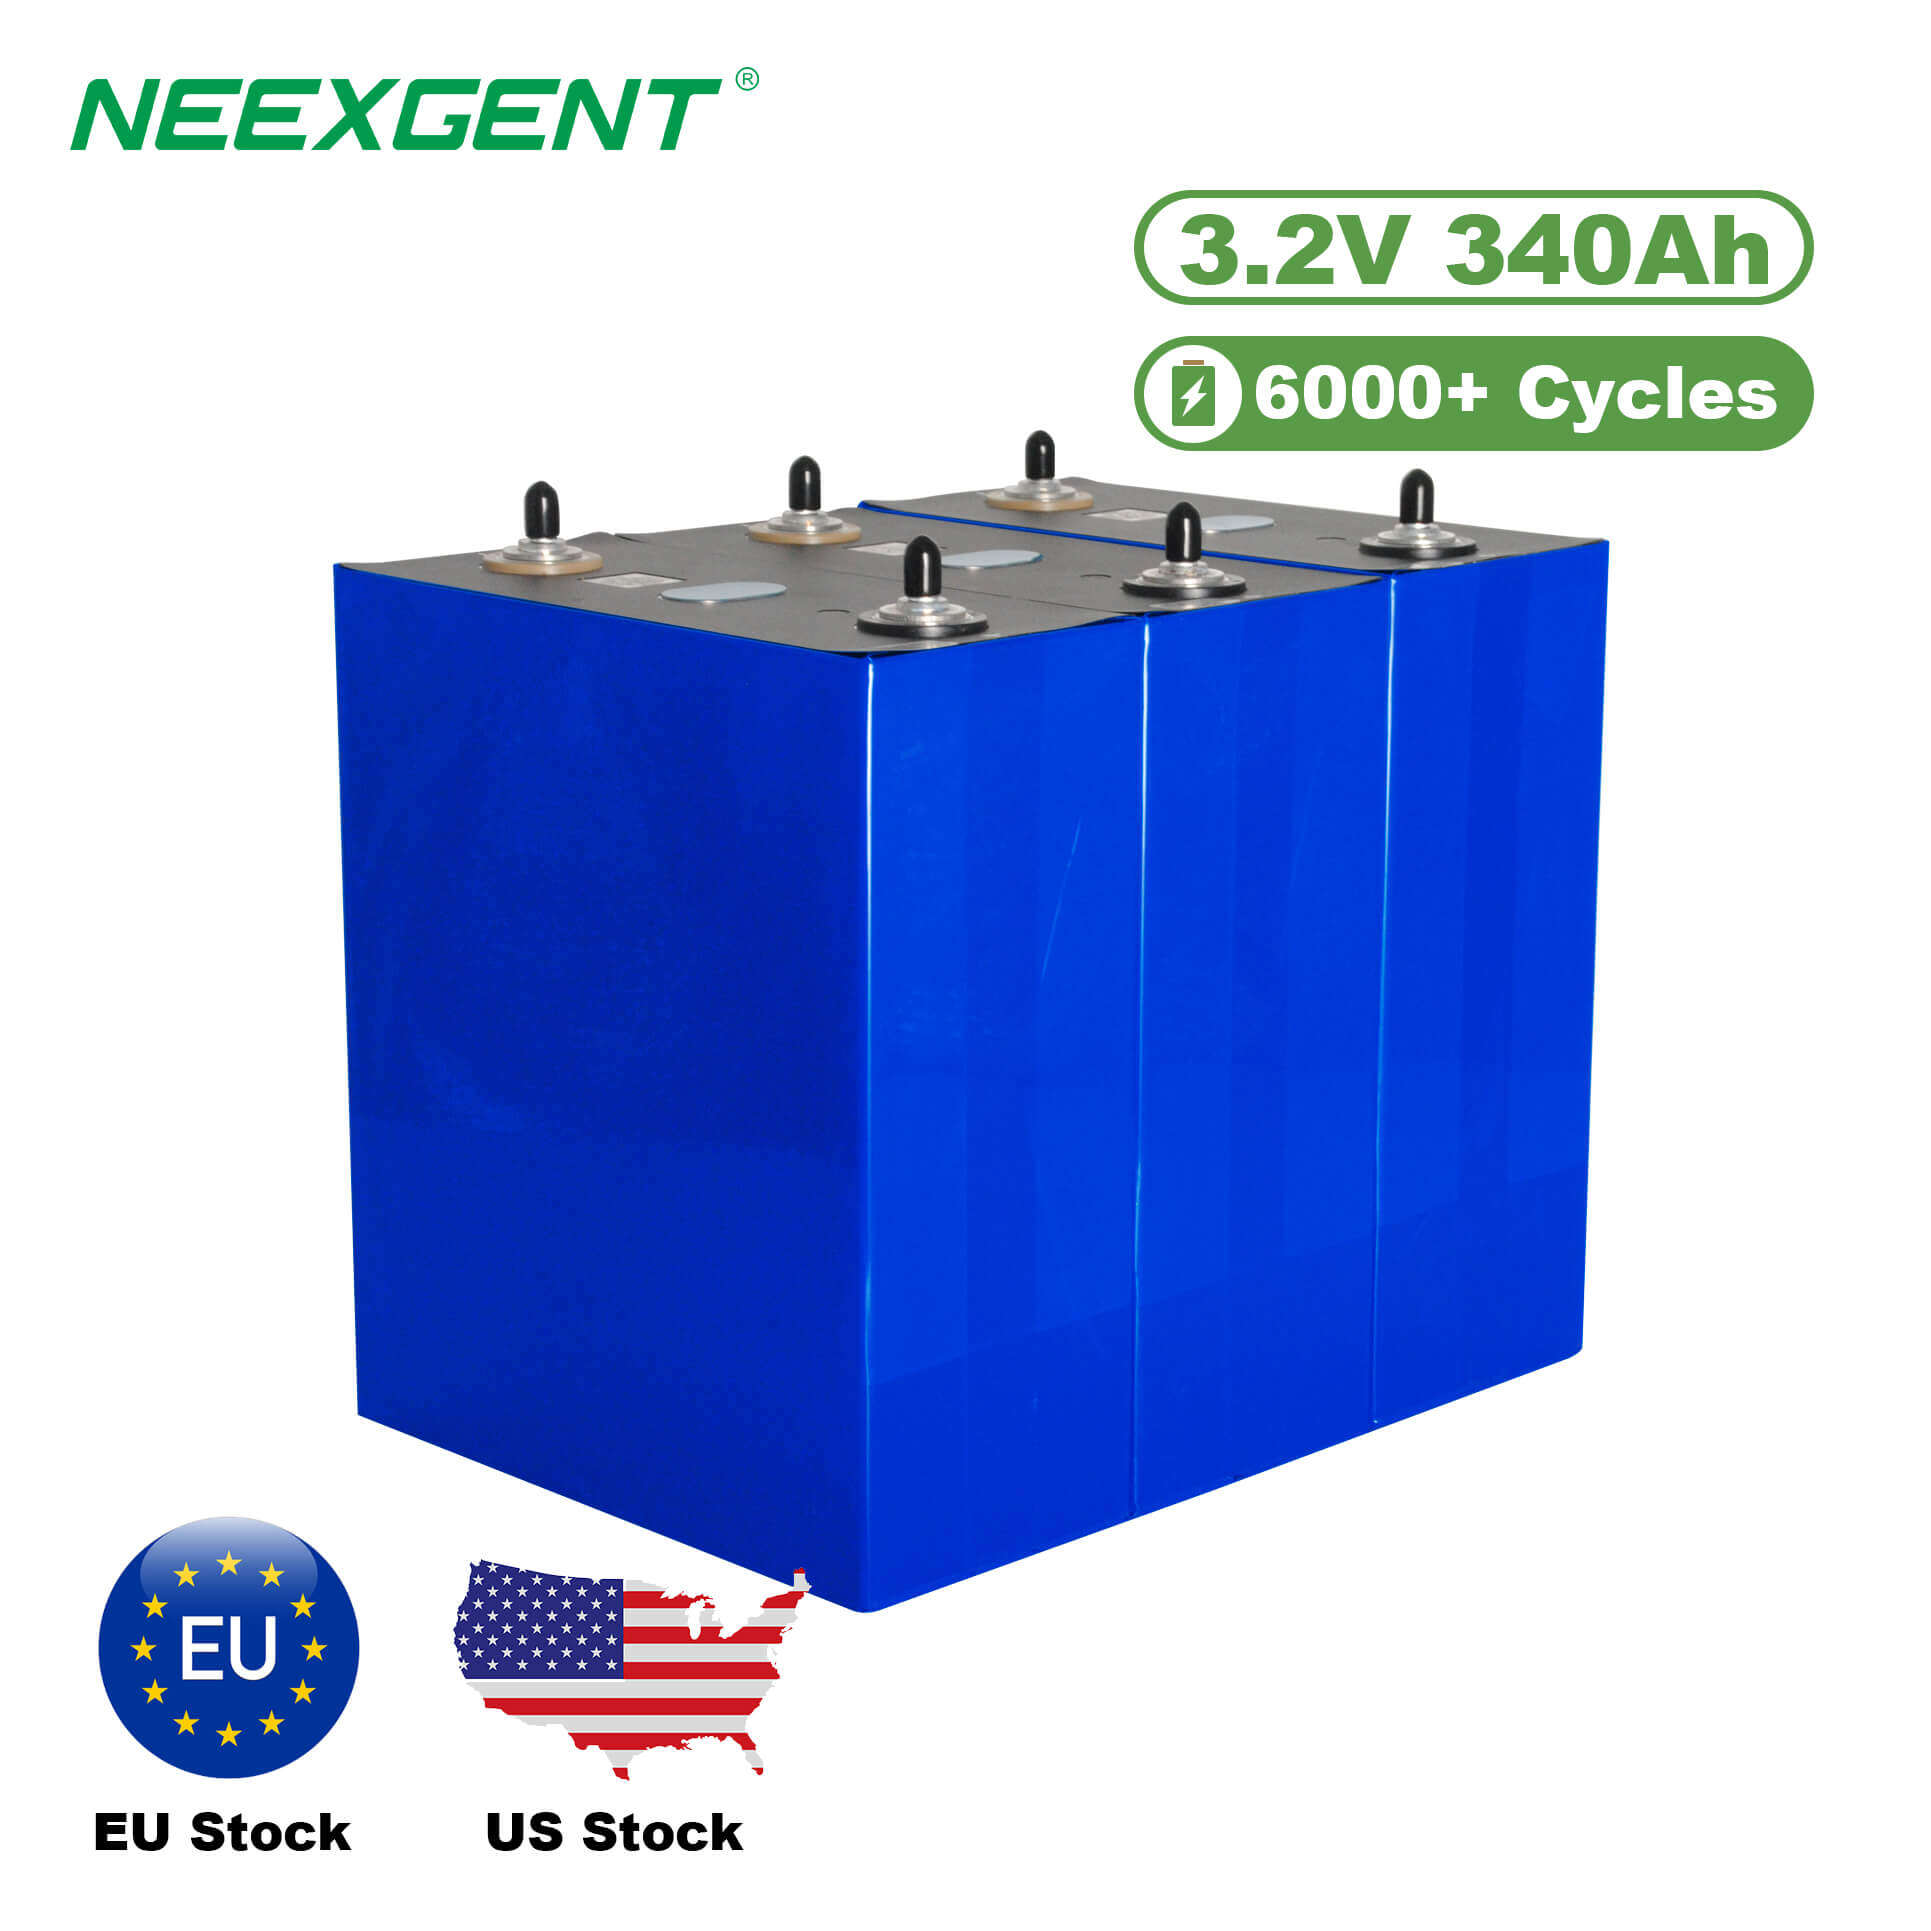 Neexgent Grade A 340Ah 3.2v Lifepo4 Battery Lithium Ion Battery For Solar Energy System